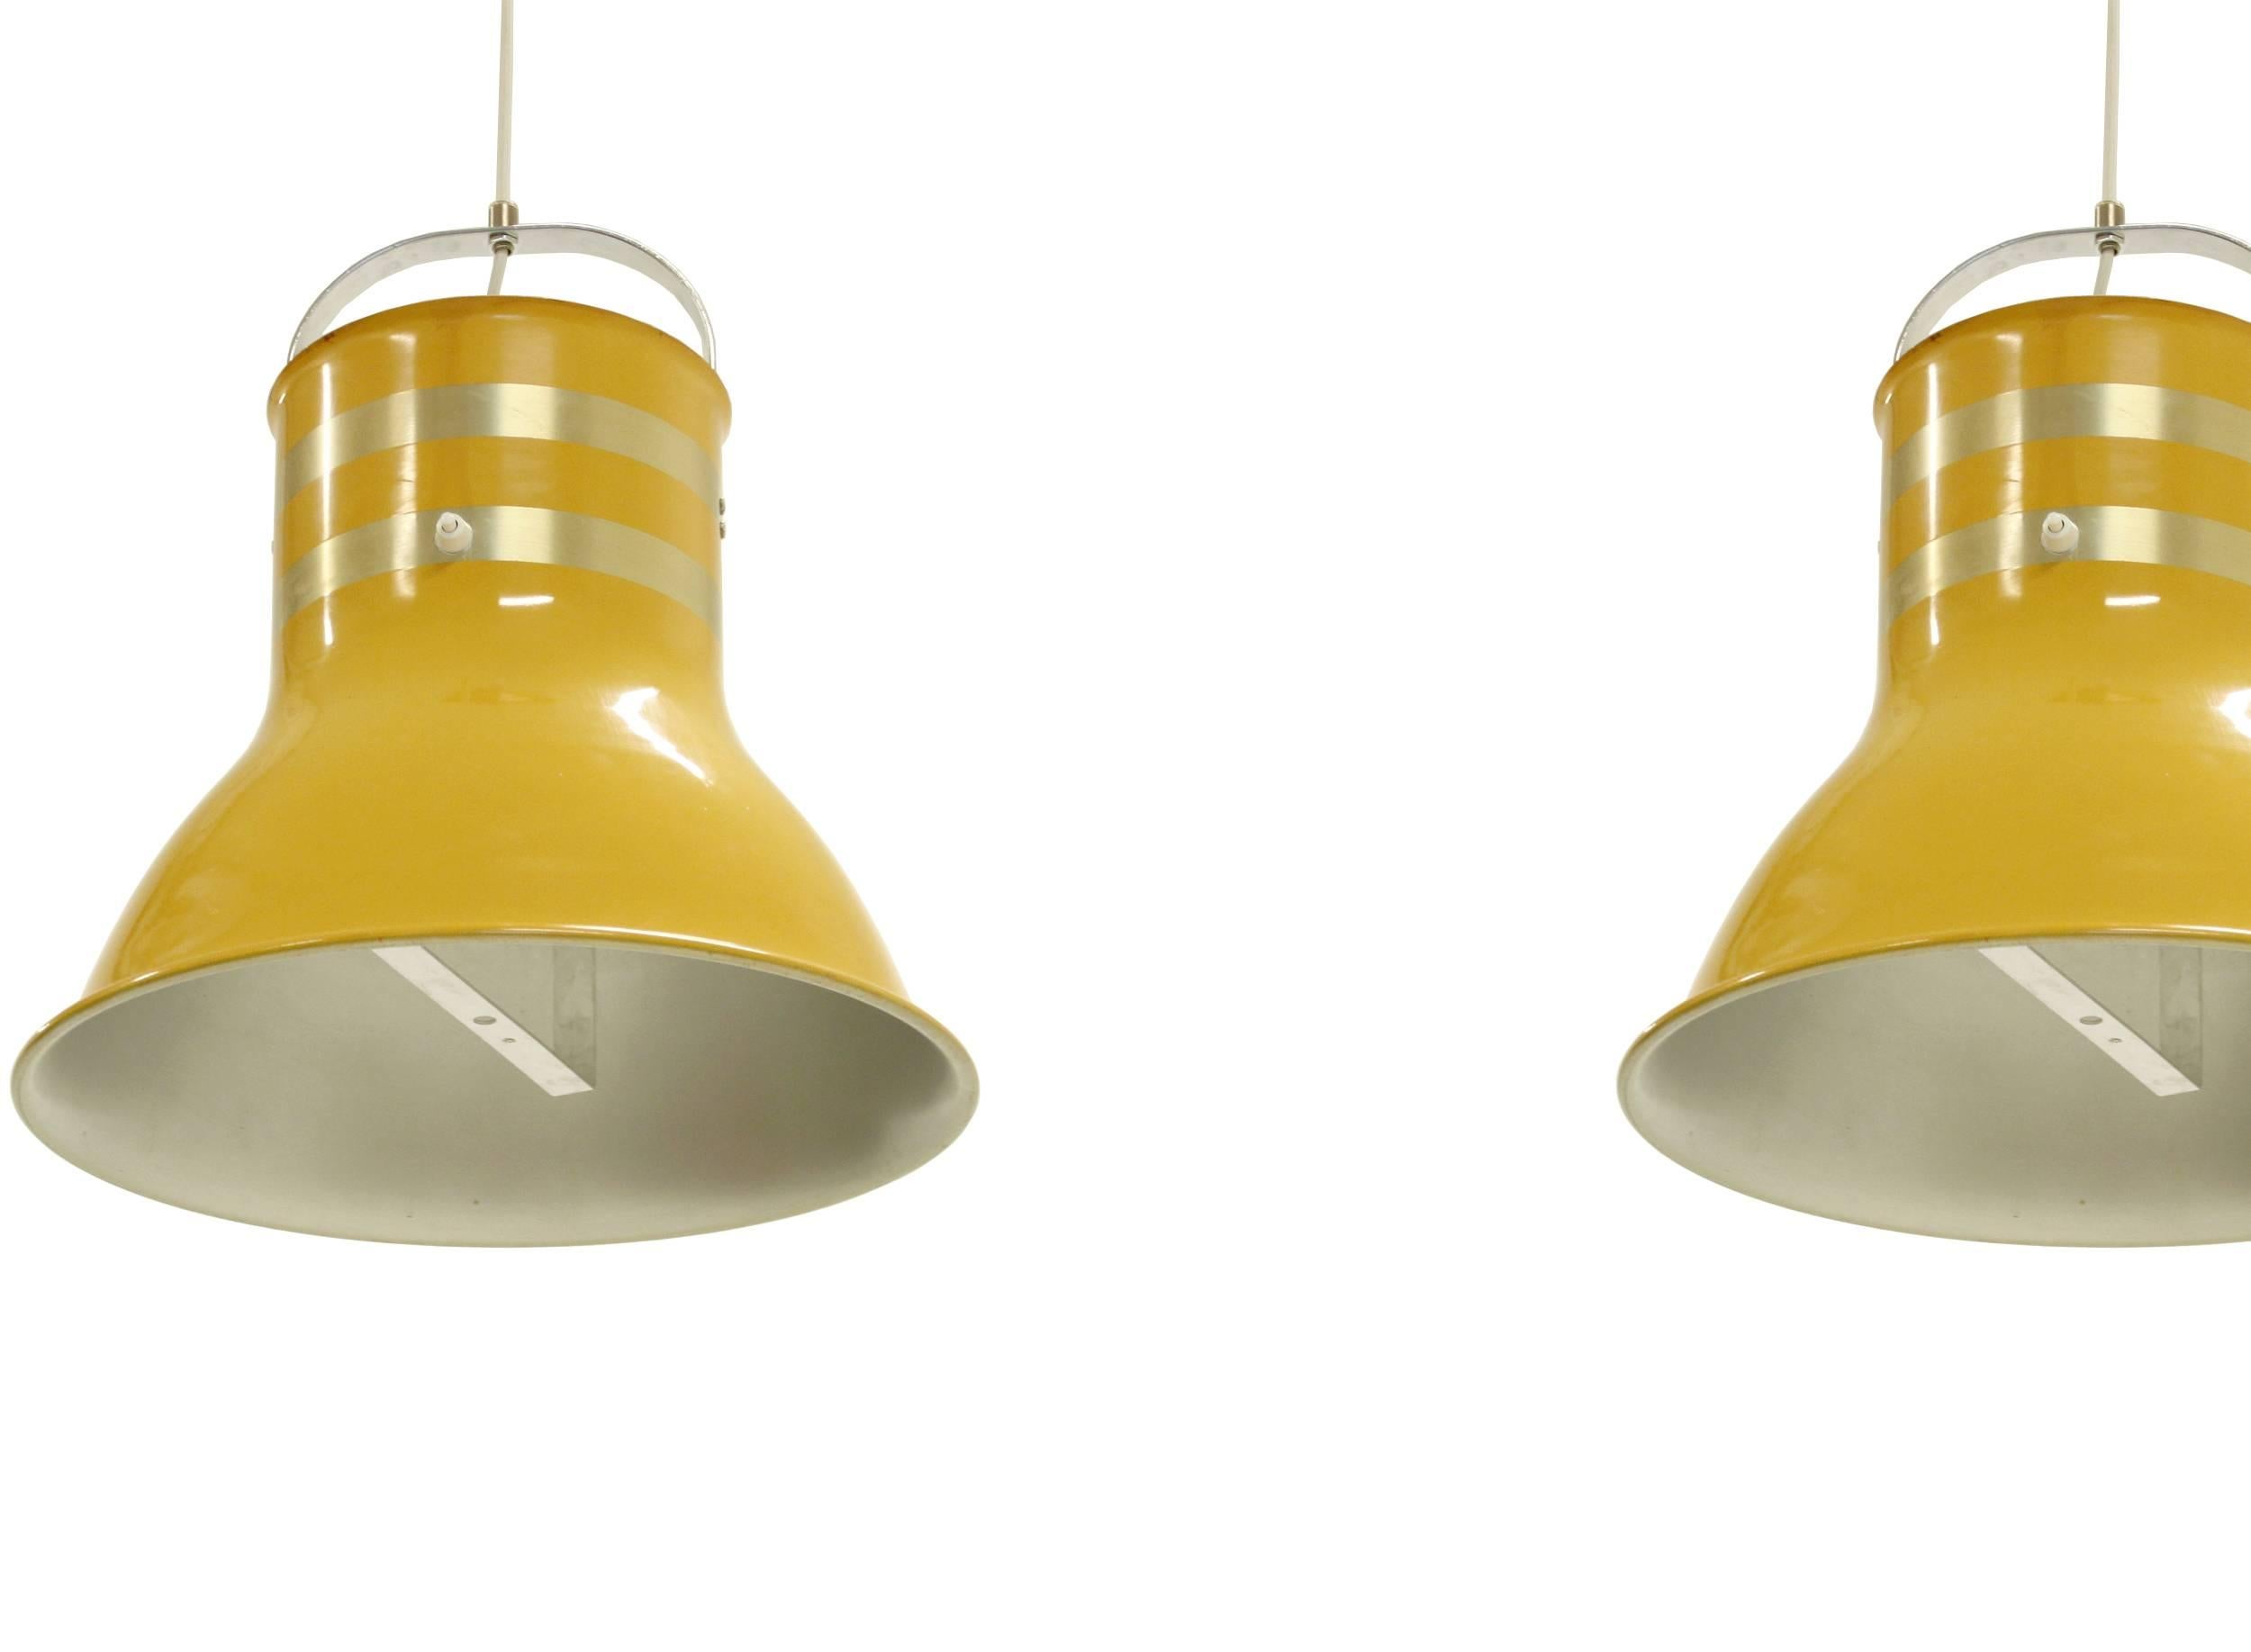 Refreshing pair of ceiling lights in painted aluminium. Designed by Per Sundstedt and made in Sweden by Kosta AB from circa 1970s first half. Both lamps have been rewired and are fully working. They are in very good vintage condition.